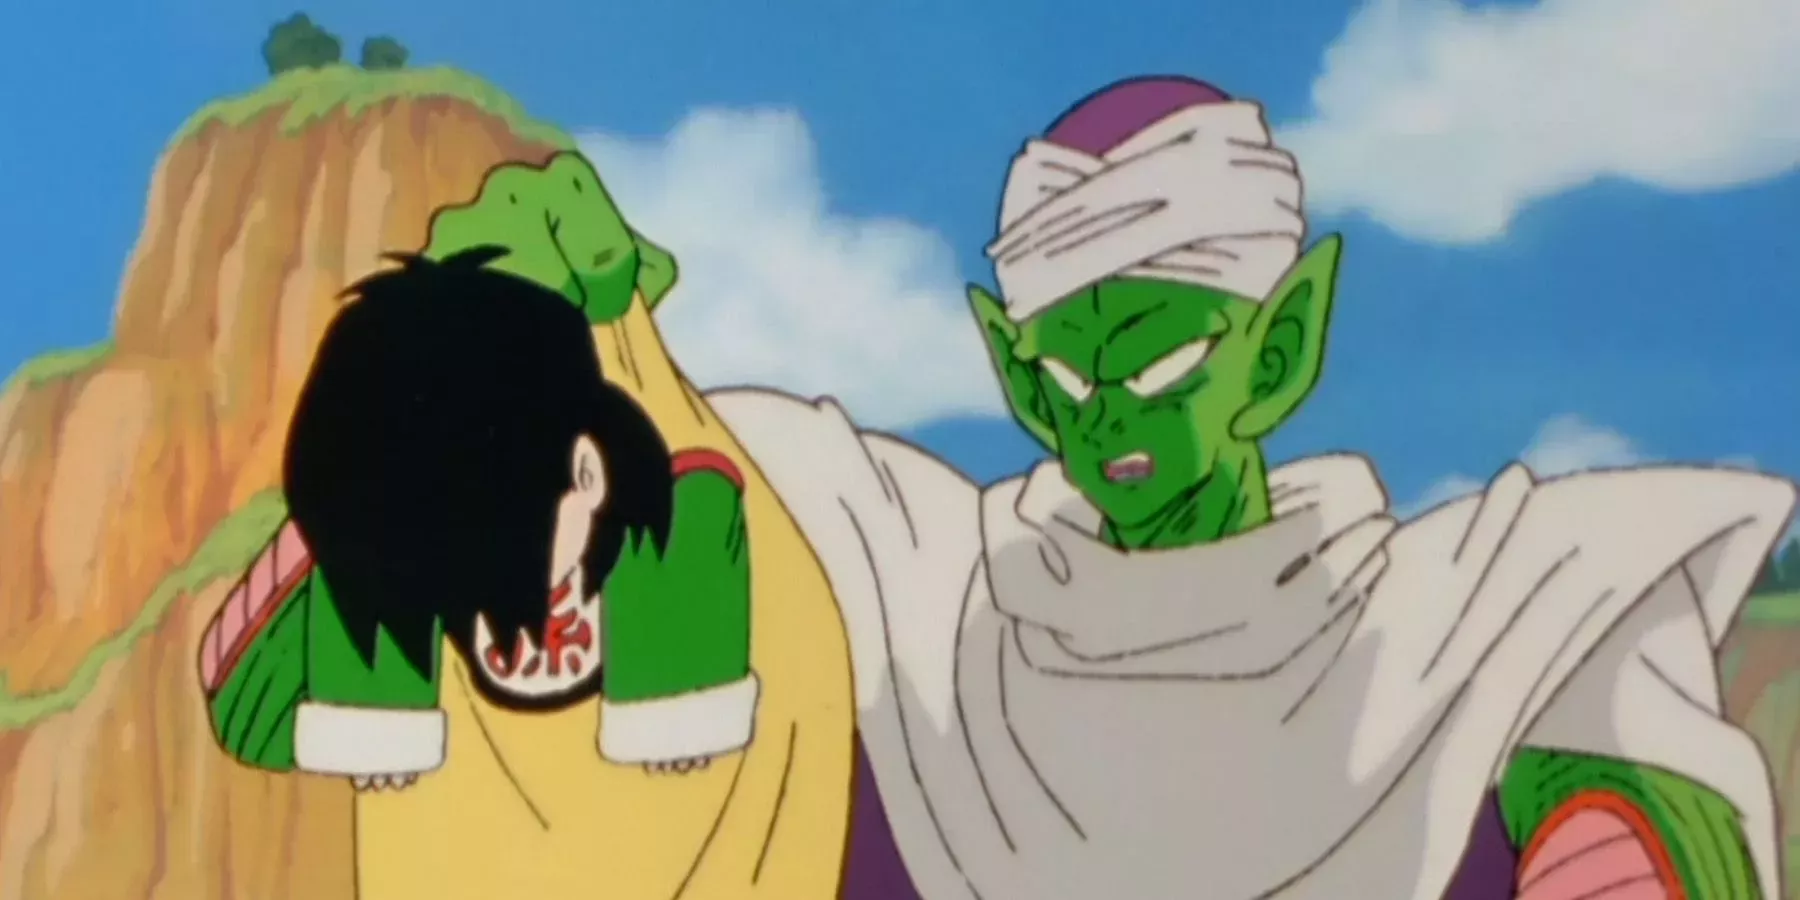 Piccolo holds up Gohan during training in Dragon Ball Z.